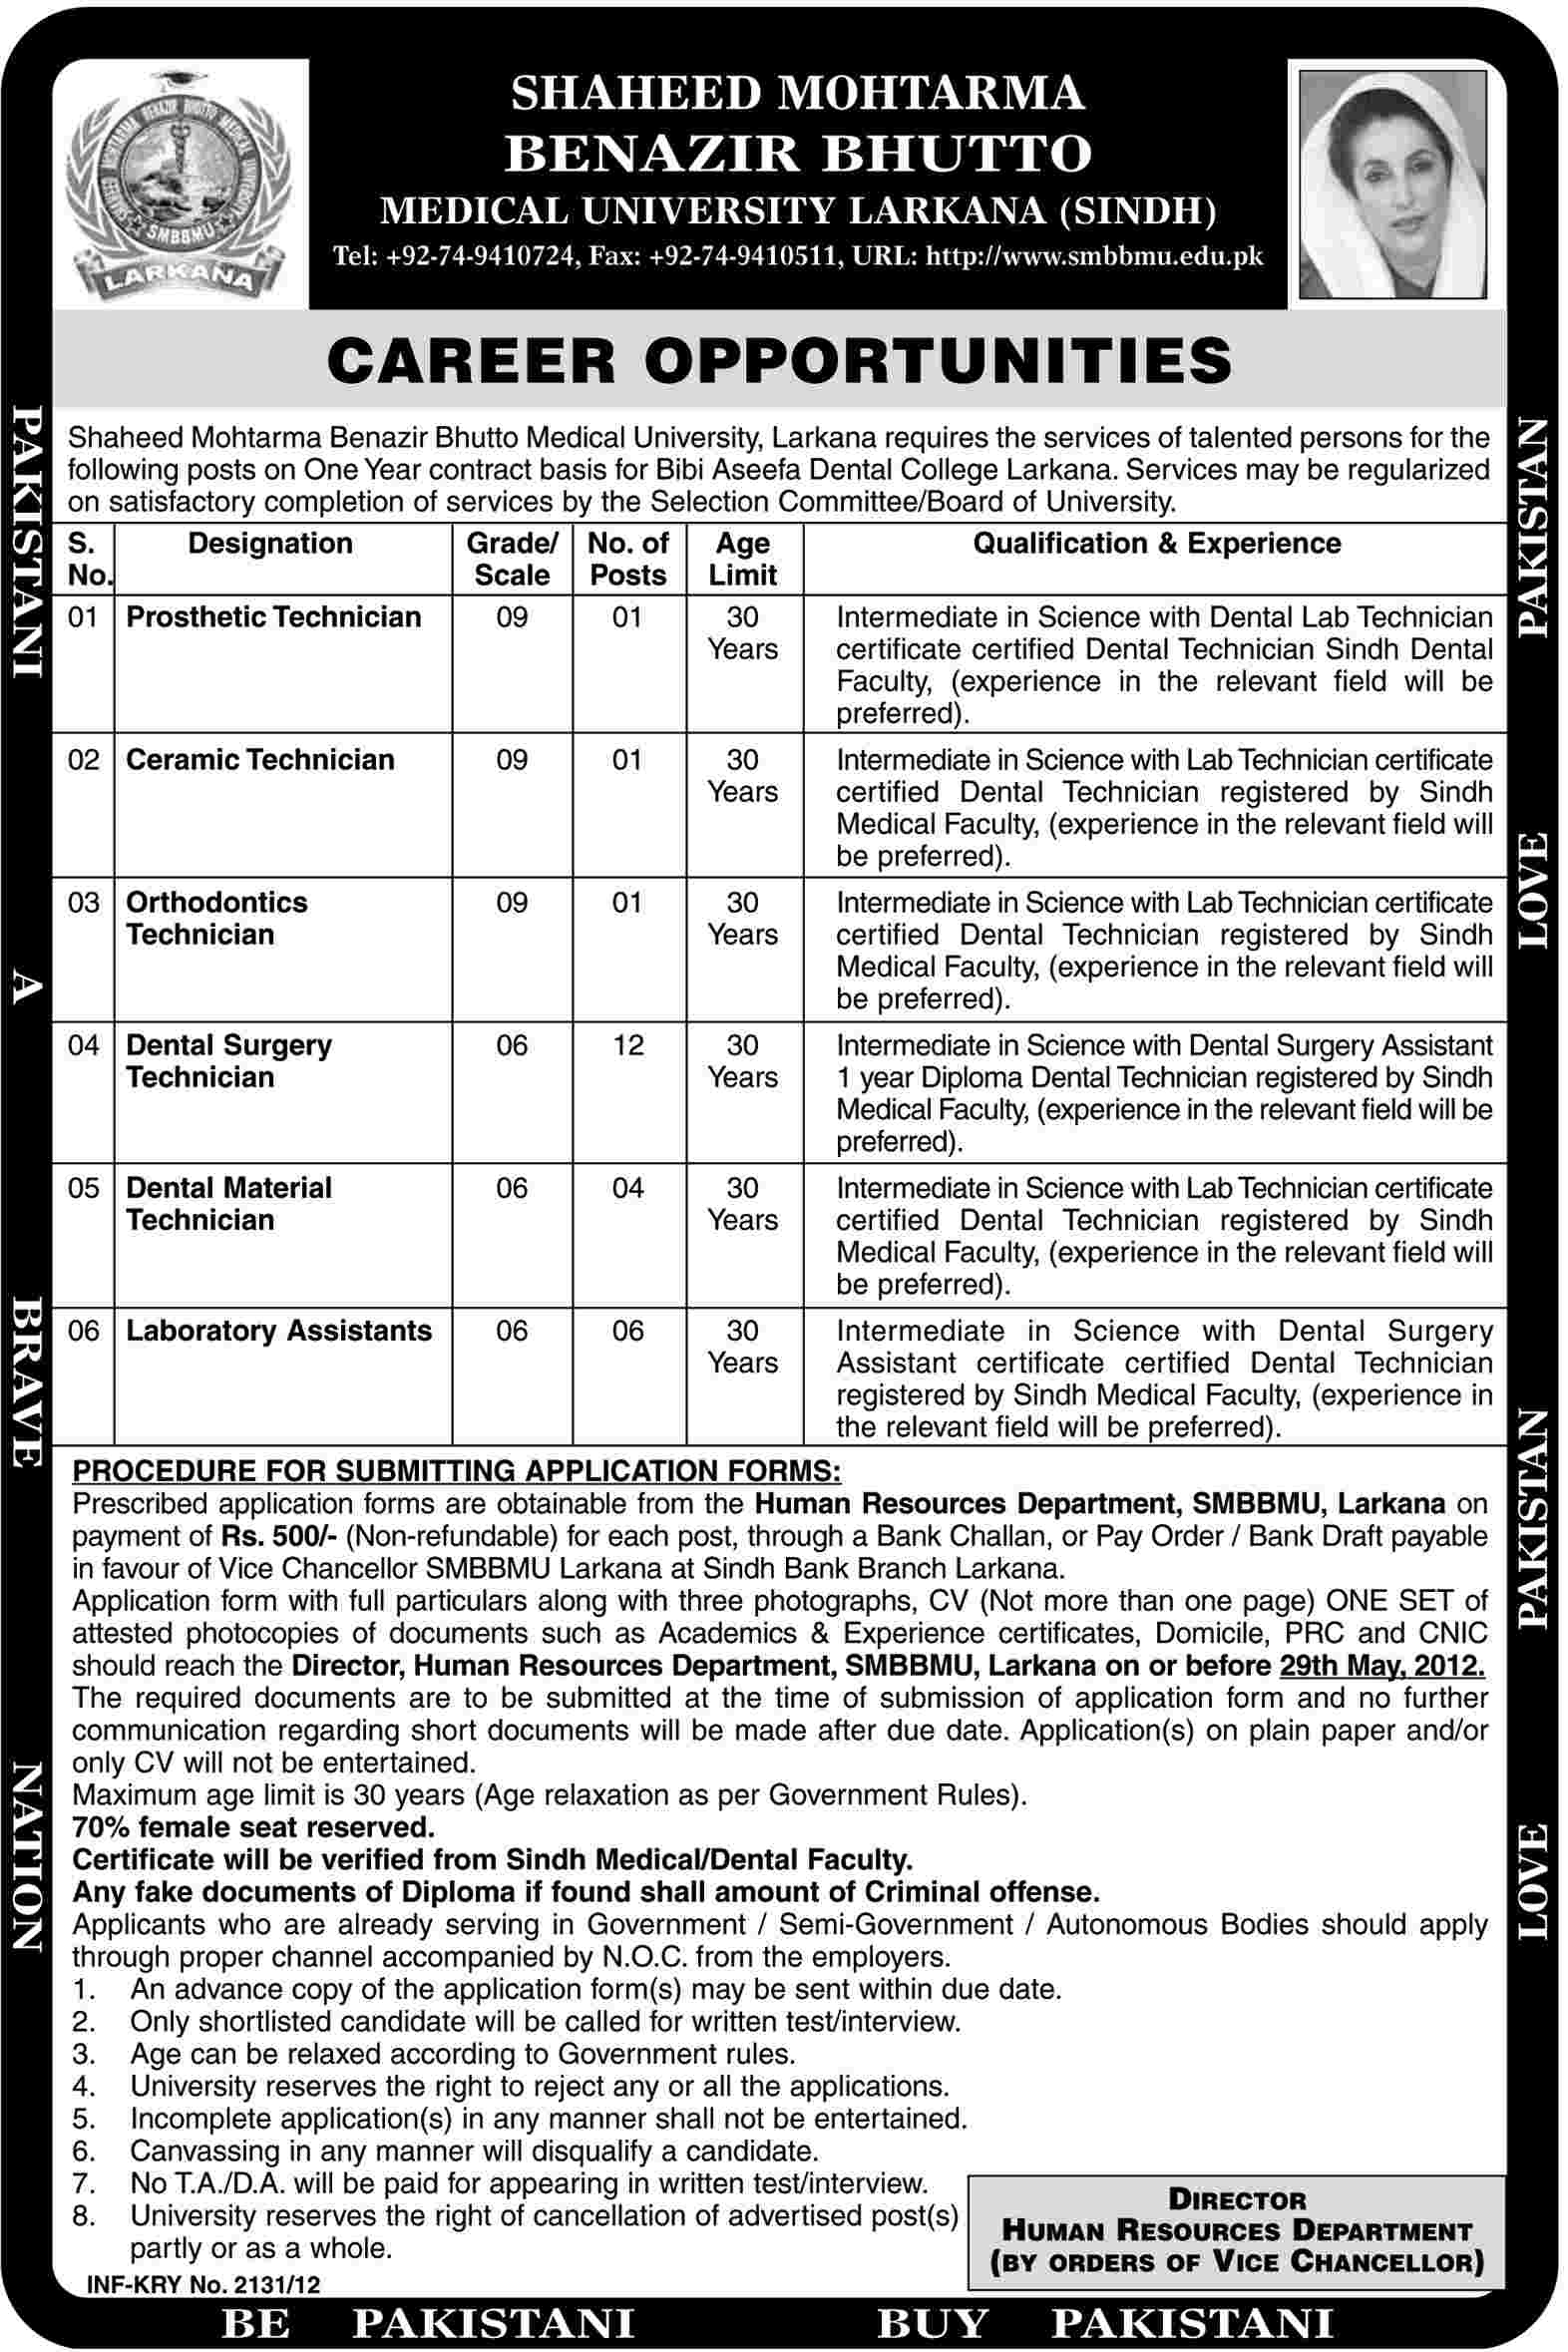 Medical Technicians Required at Shaheed Mohtarma Benazir Bhutto Medical University